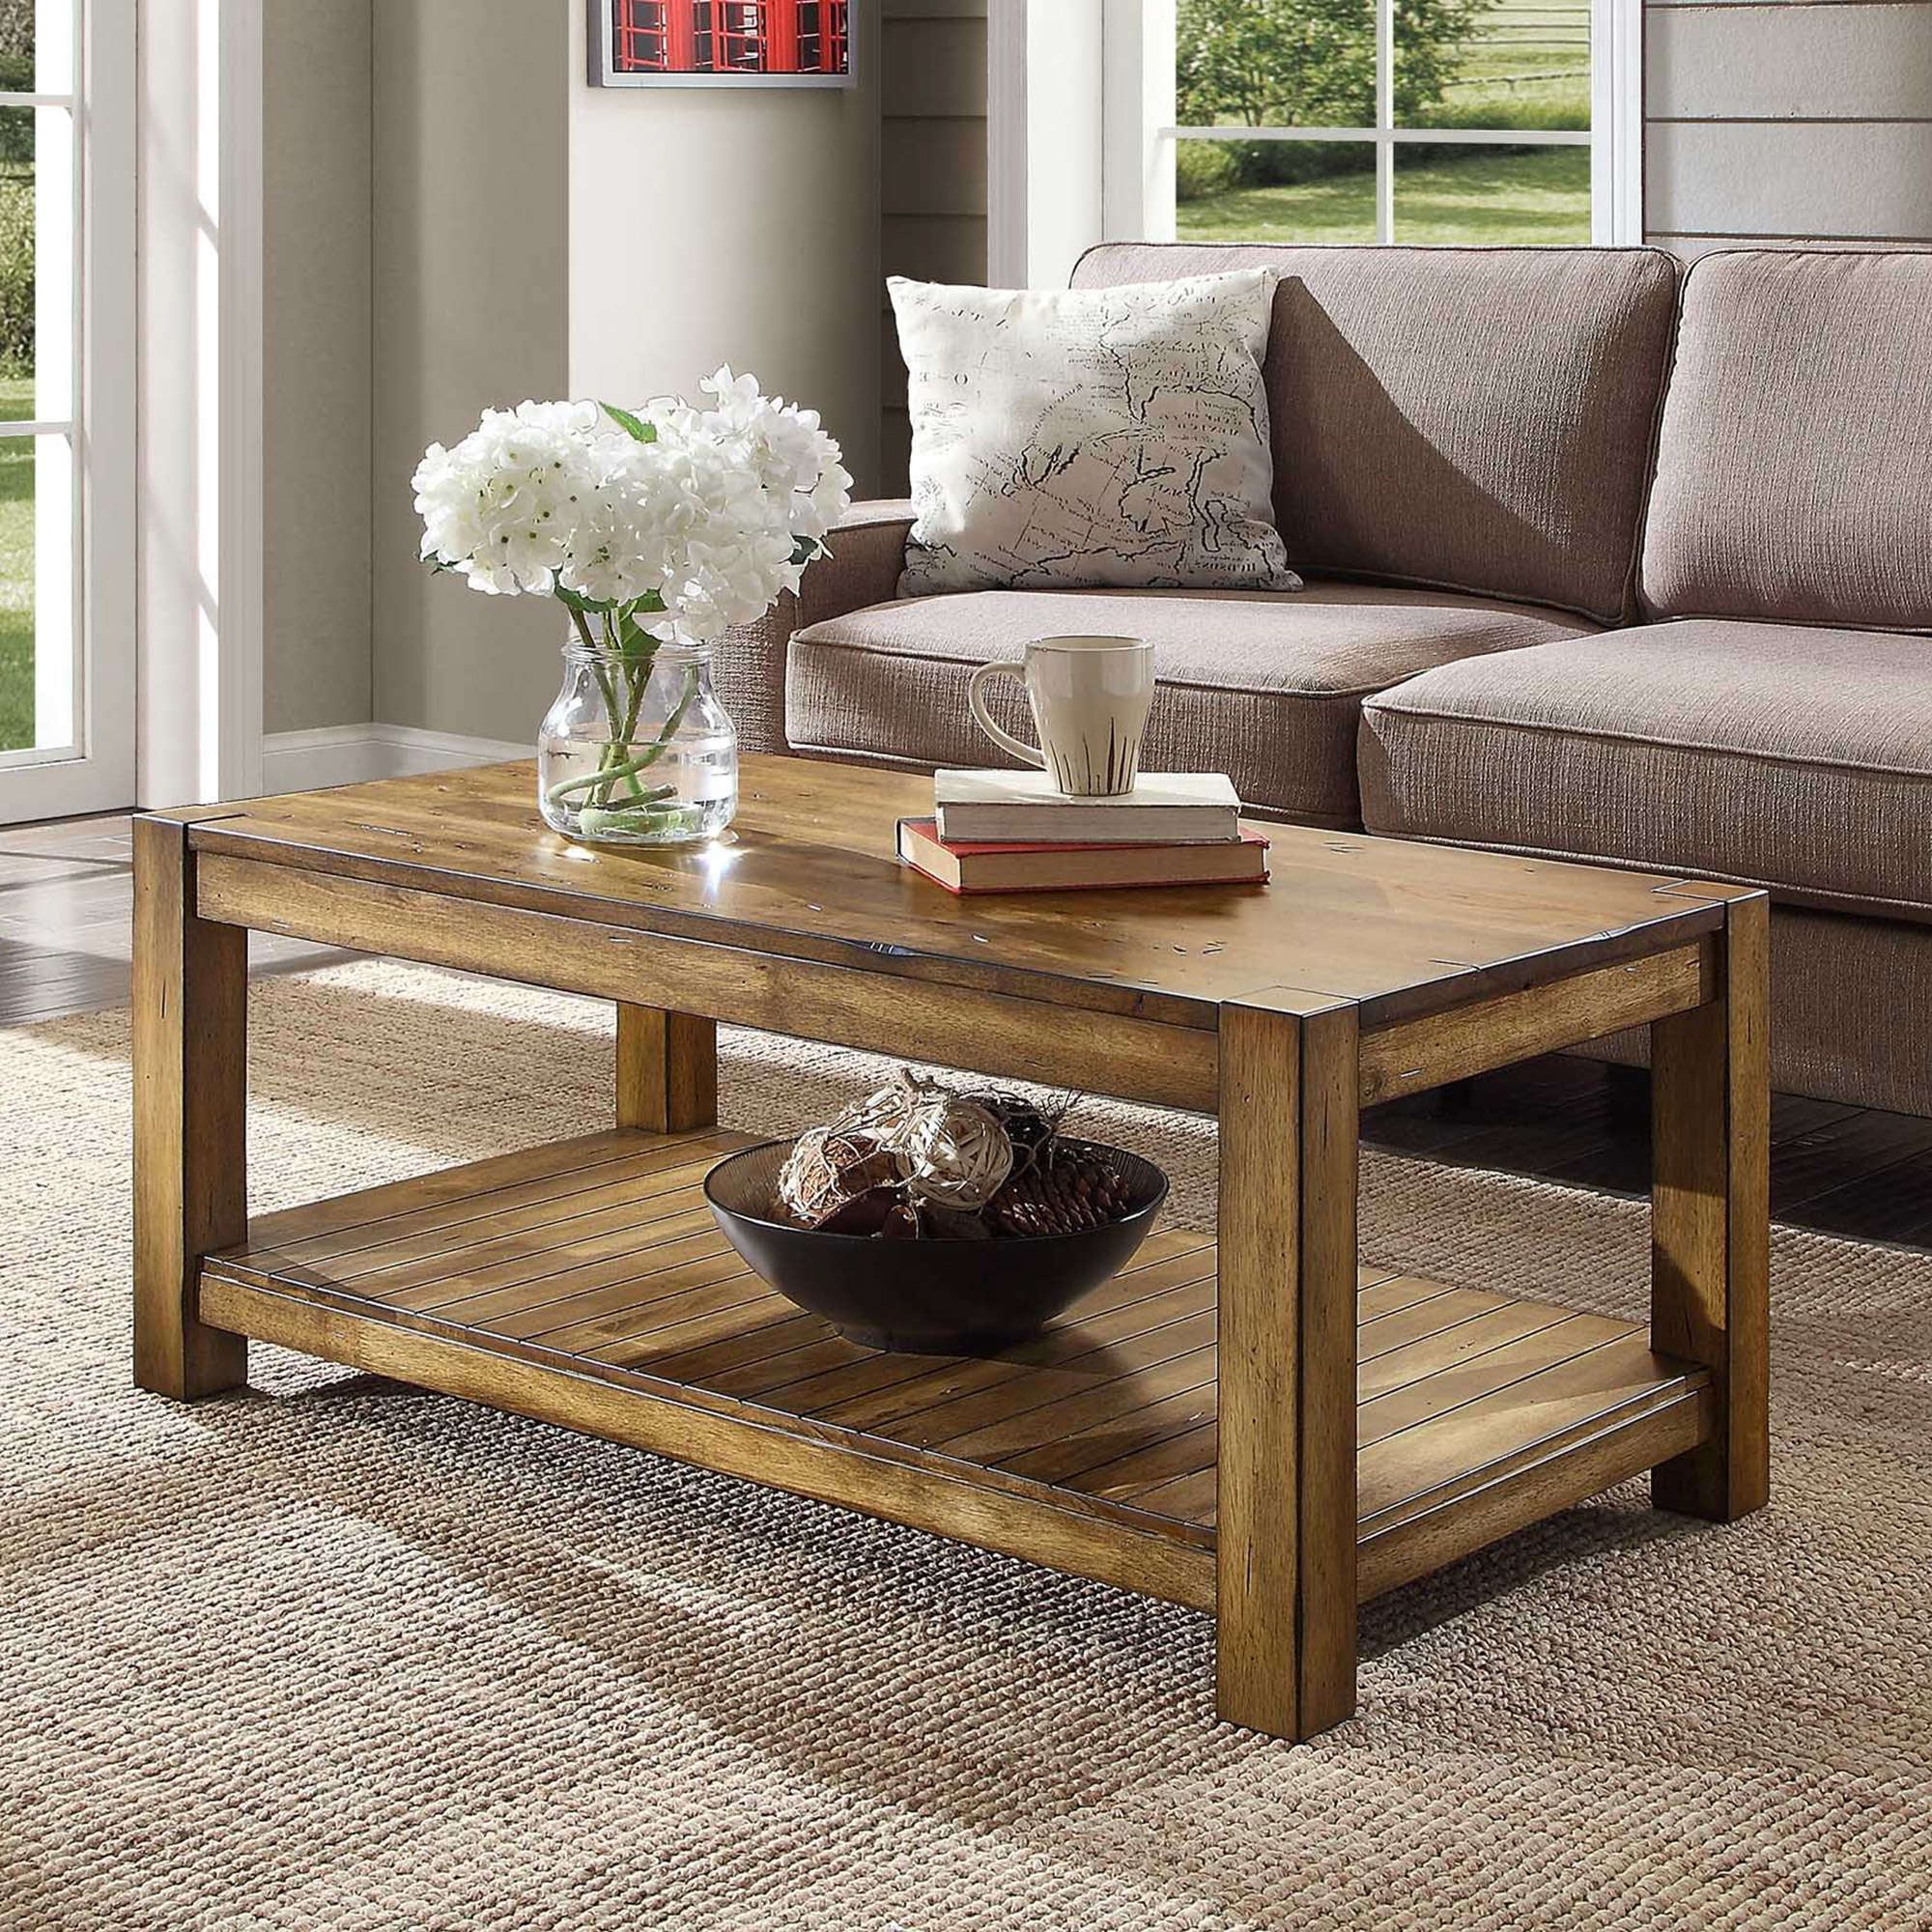 Brown Rustic Coffee Tables In Most Popular Bryant Solid Wood Coffee Table, Rustic Maple Brown Finish – Walmart (View 2 of 15)